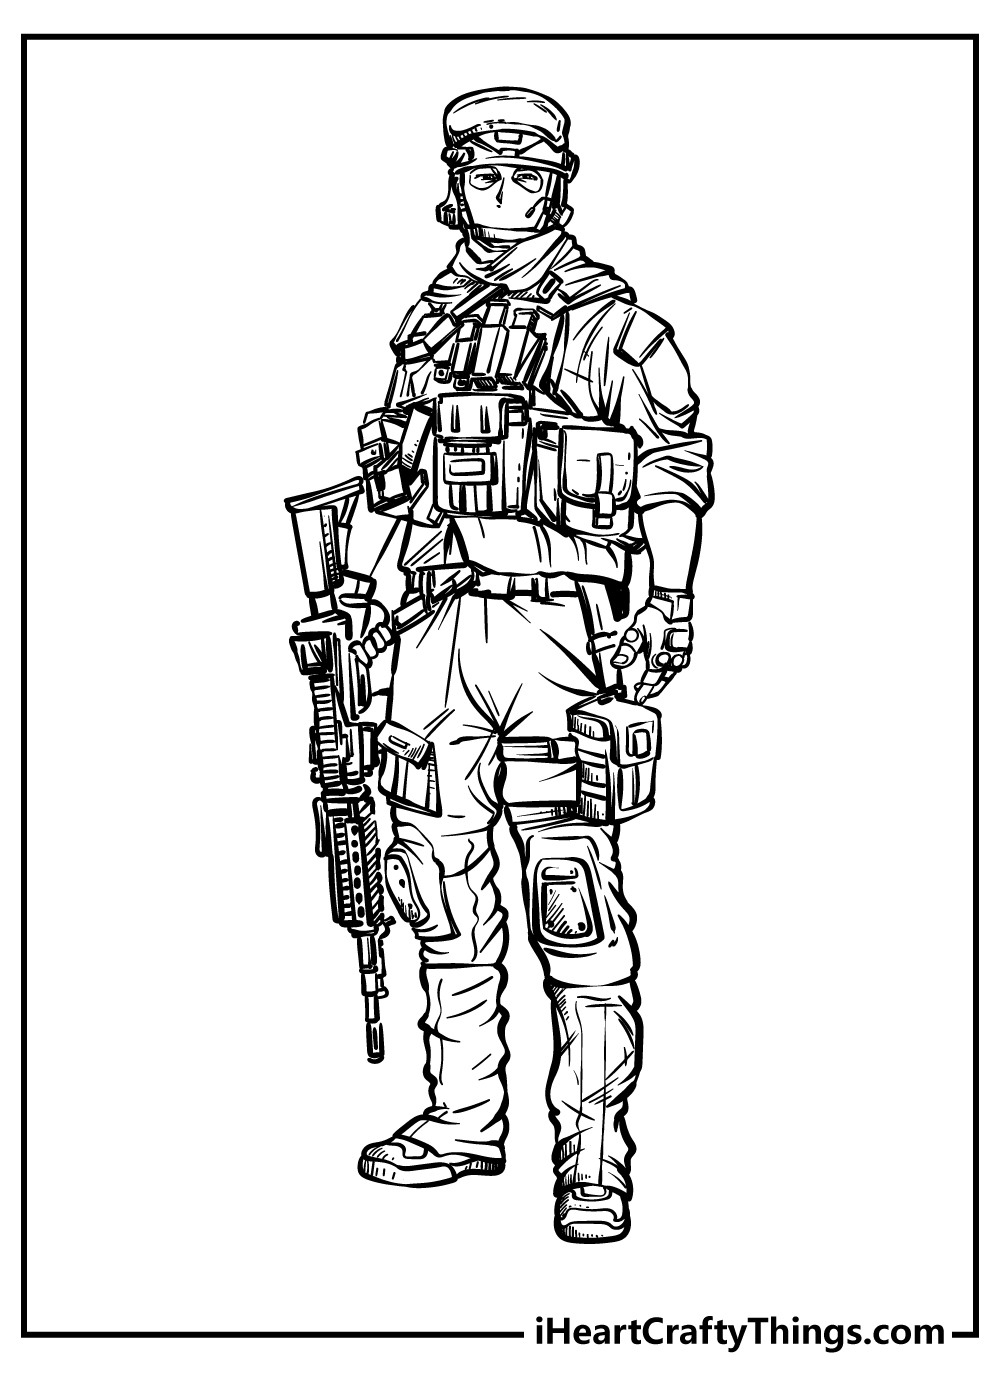 Army Coloring Book for adults free download